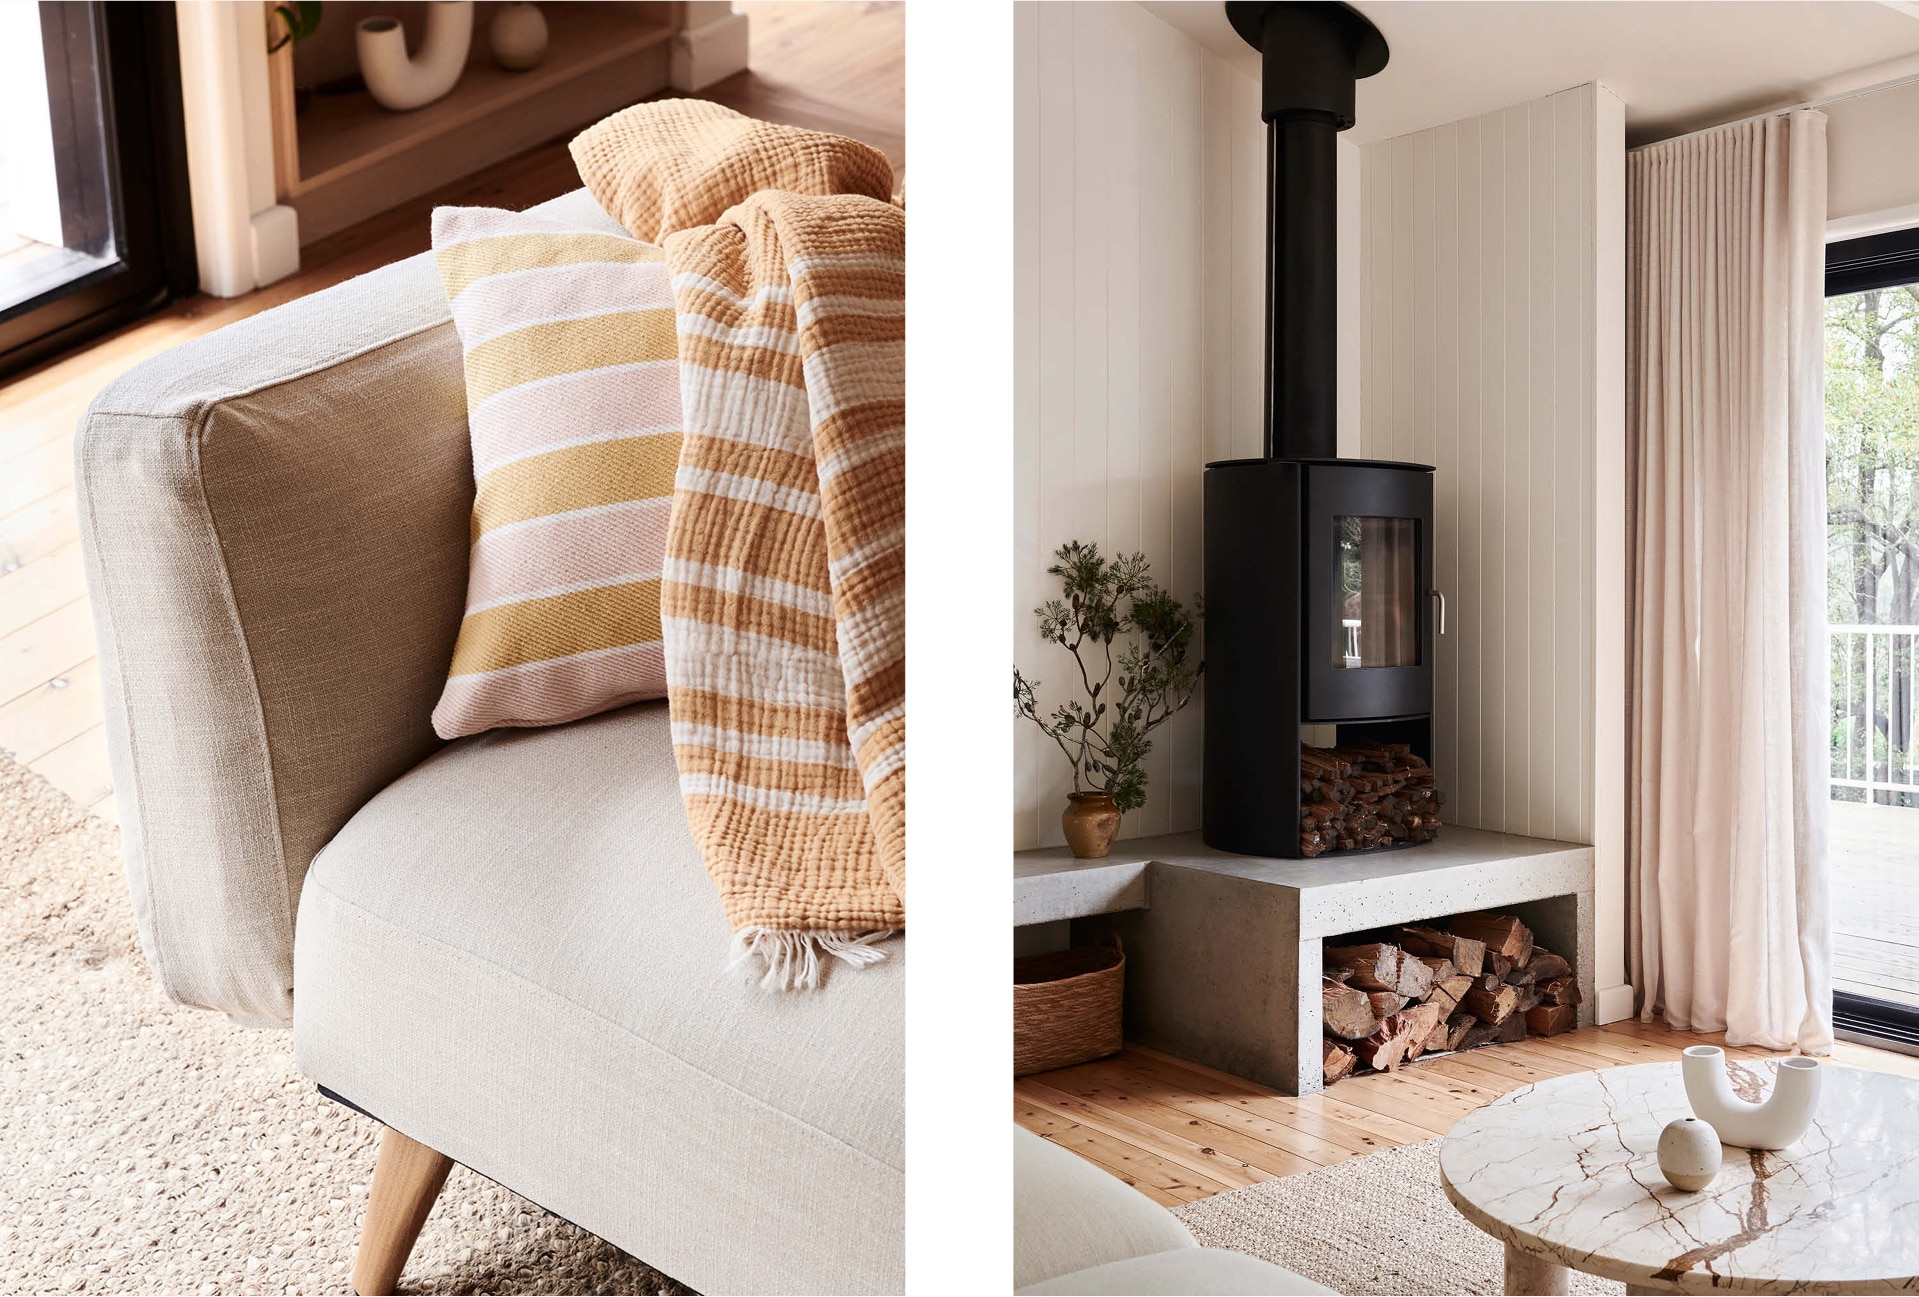 split image. left side has close up of corner of couch, with yellow and pink stanfield cushion, and mustard and white throw with fringing and stripes. right side: shot of the fireplace in corner of living room.